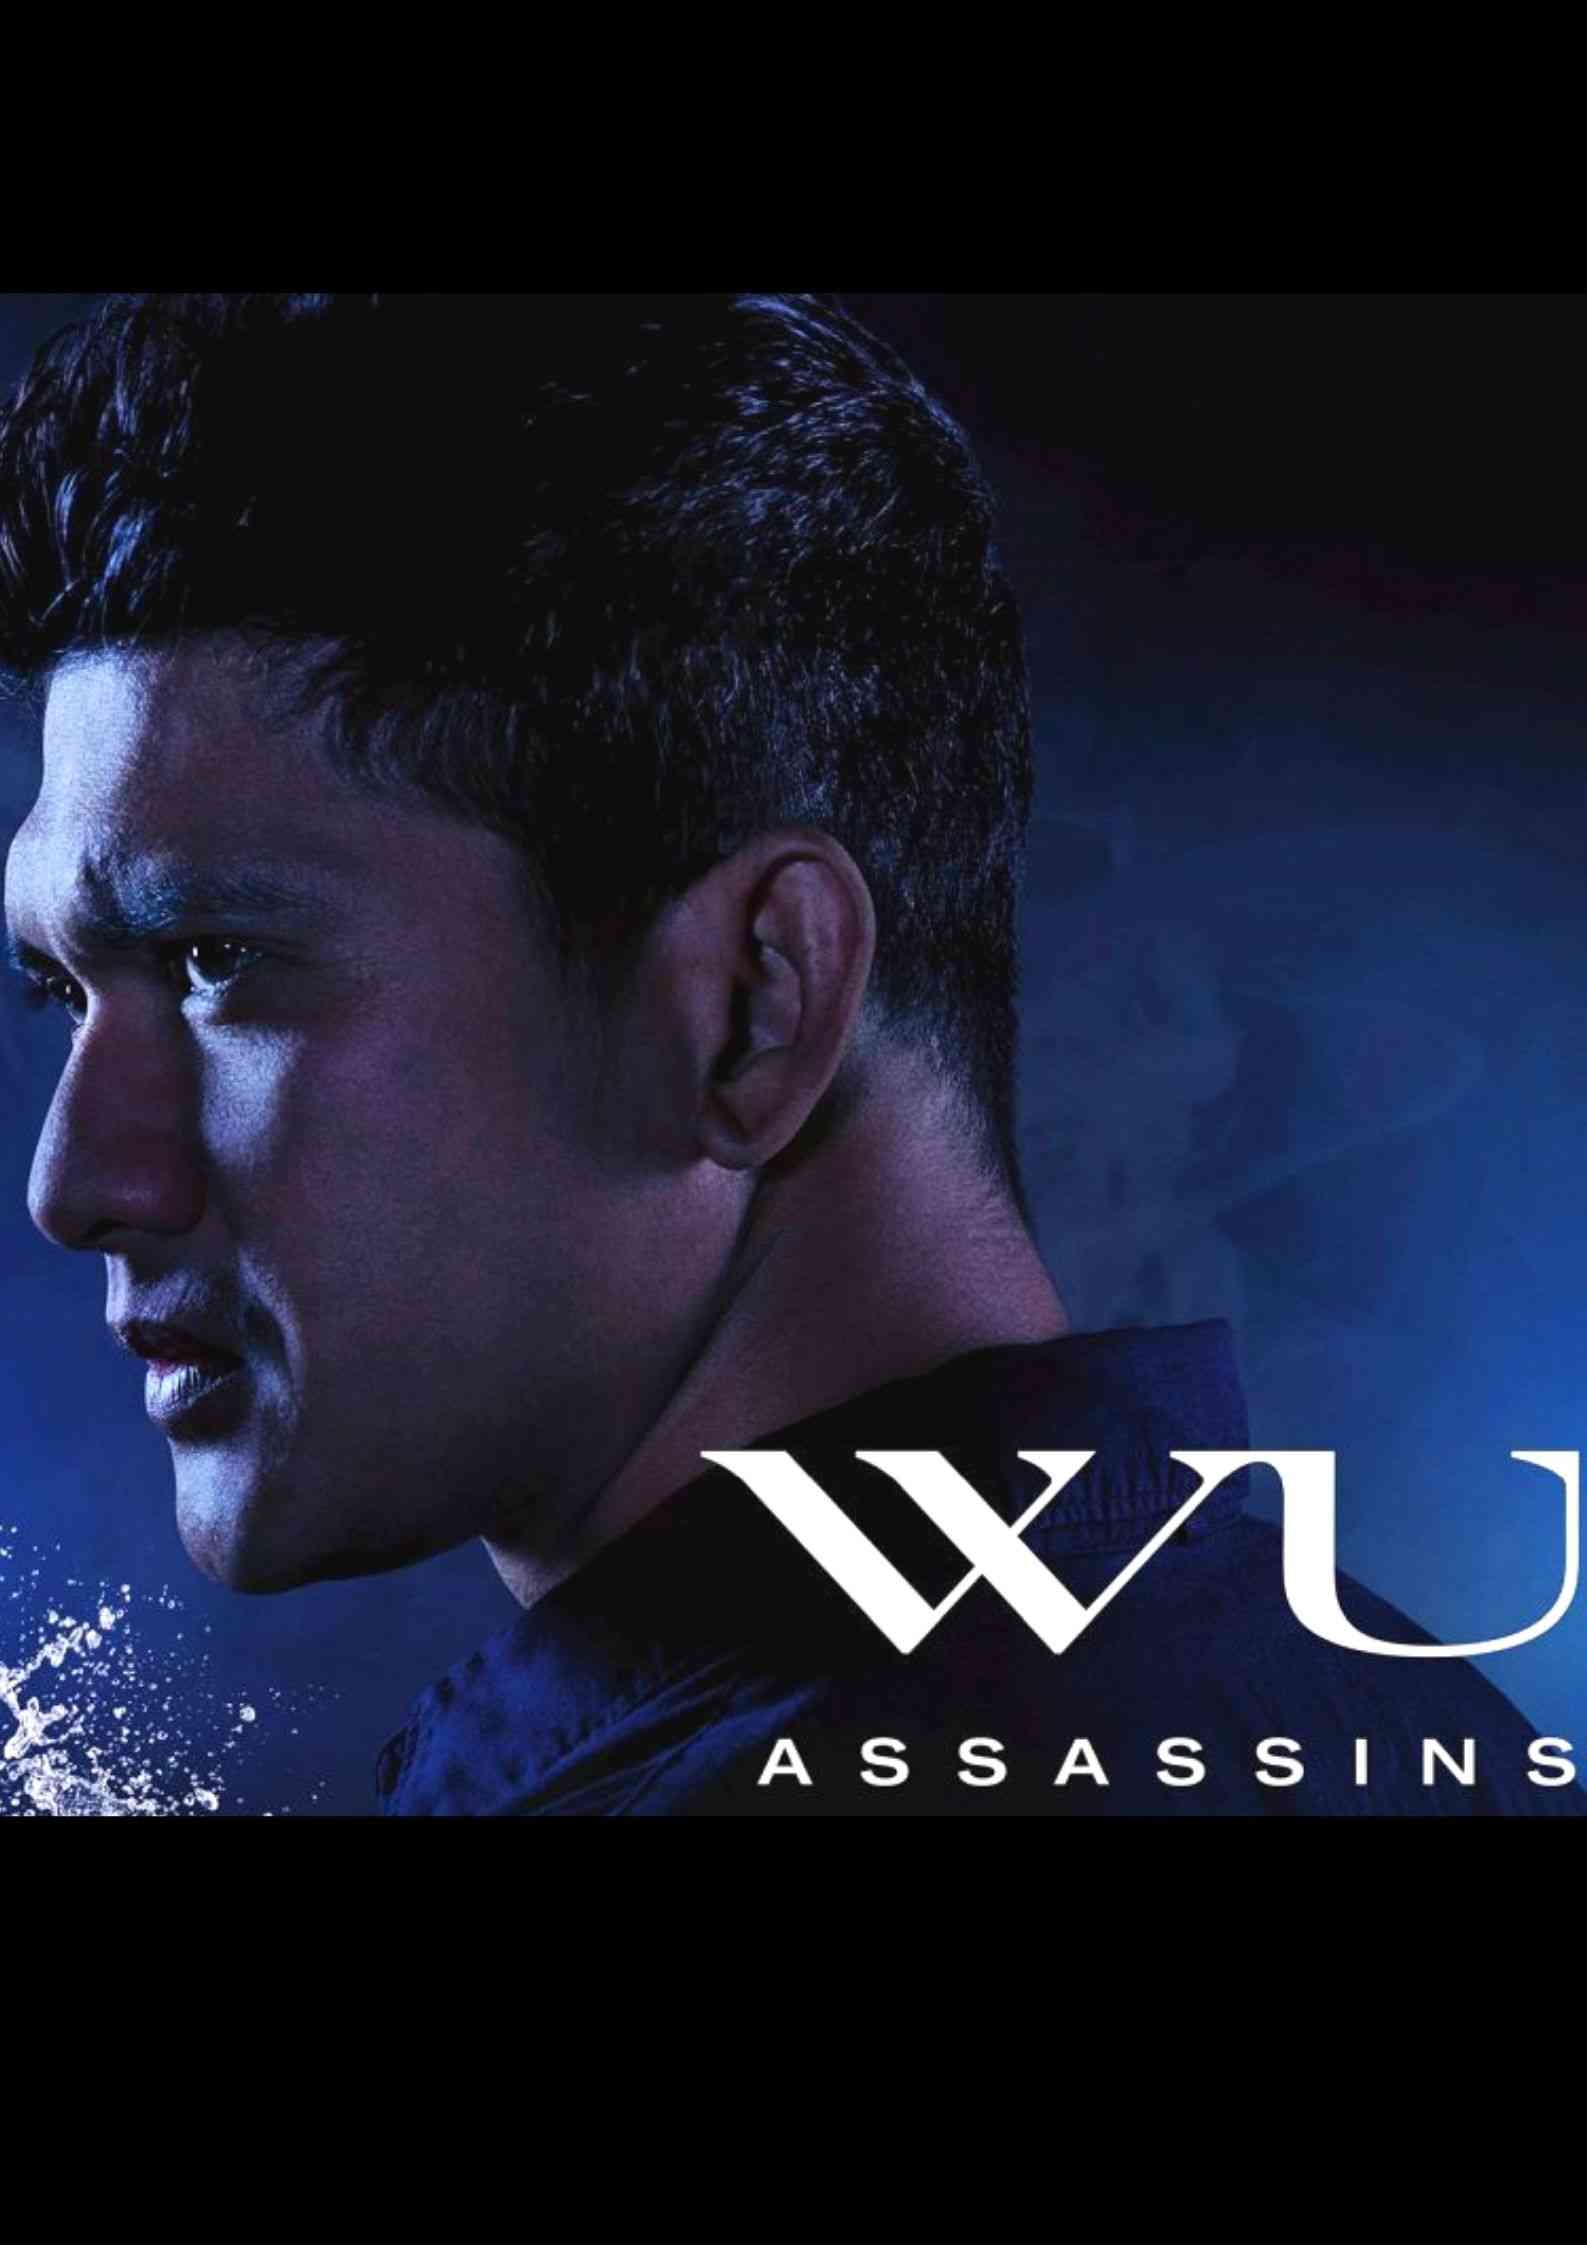 Wu Assassins parents guide and Age Rating | 2019